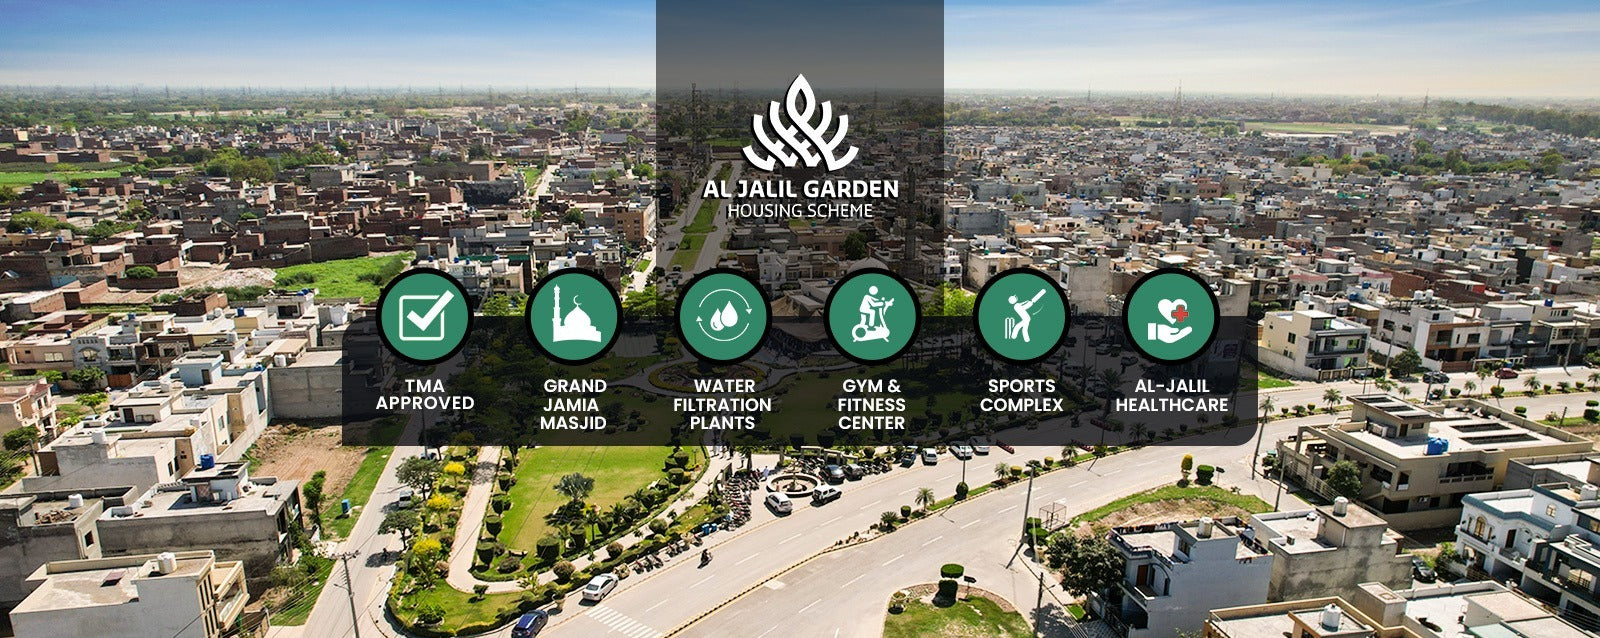 Exploring the Amenities of Al Jalil Garden, A closer look at the facilities and services